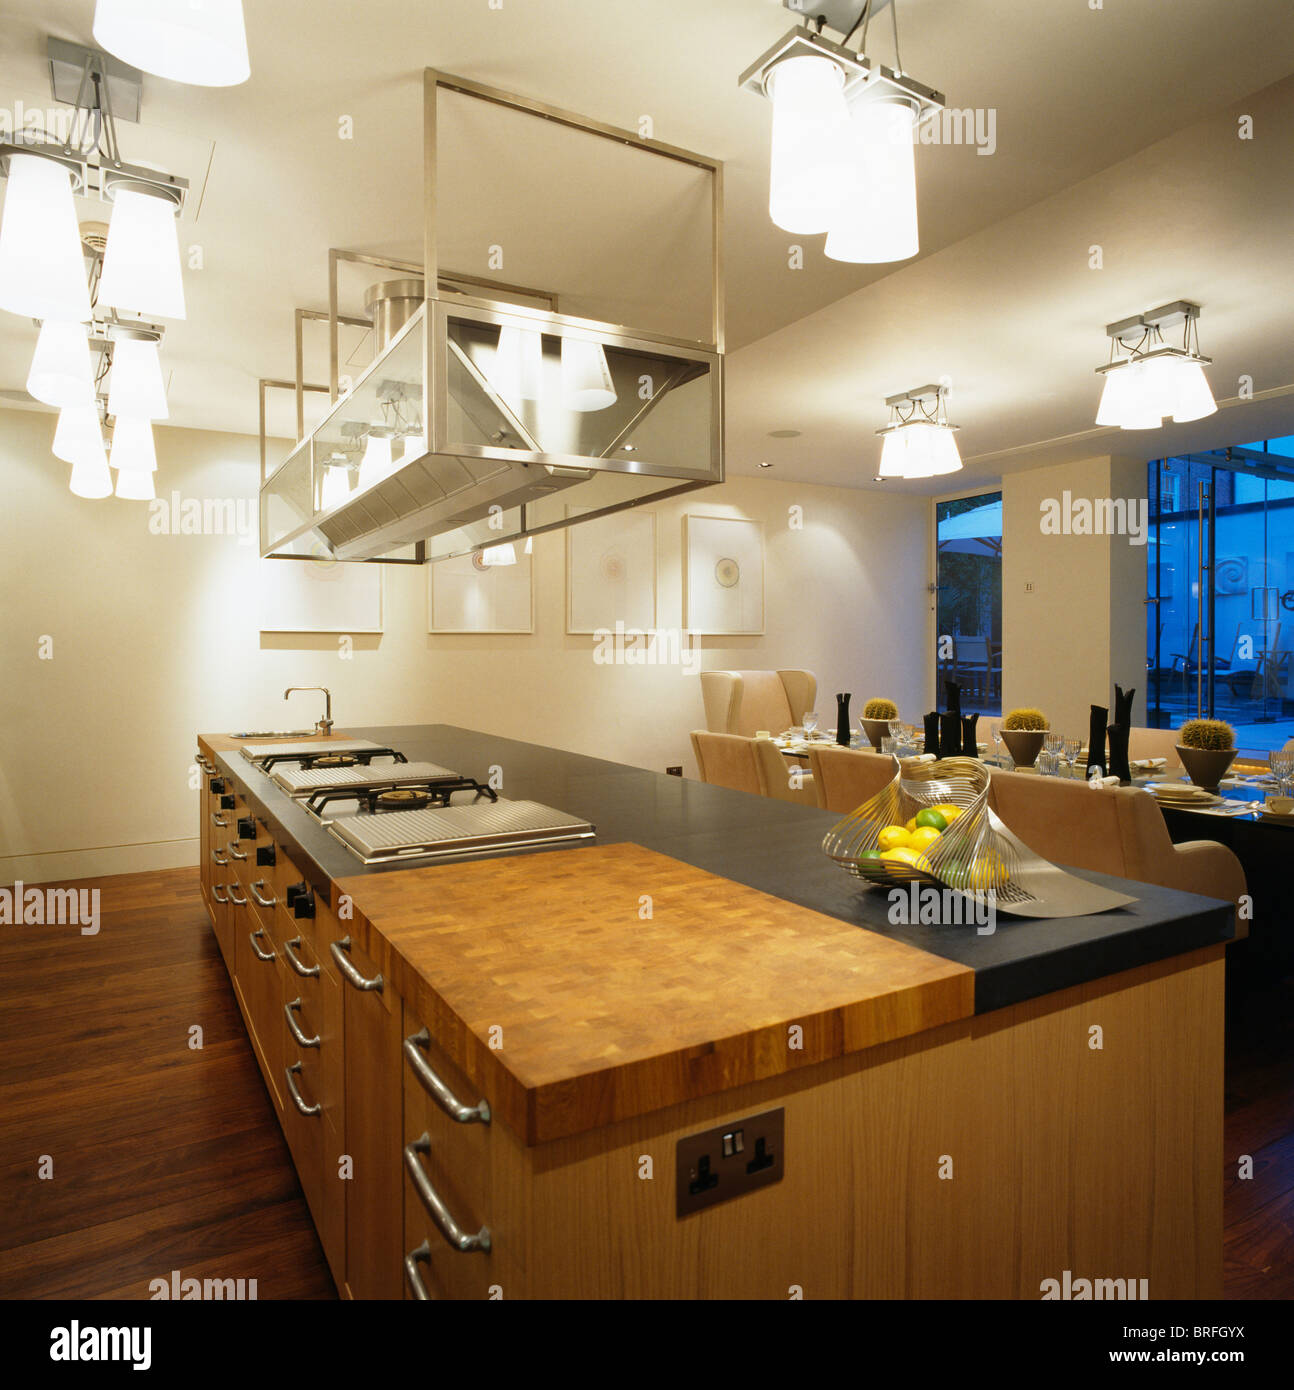 Suspended Stainless Steel Shelving And Ceiling Lights Above Island